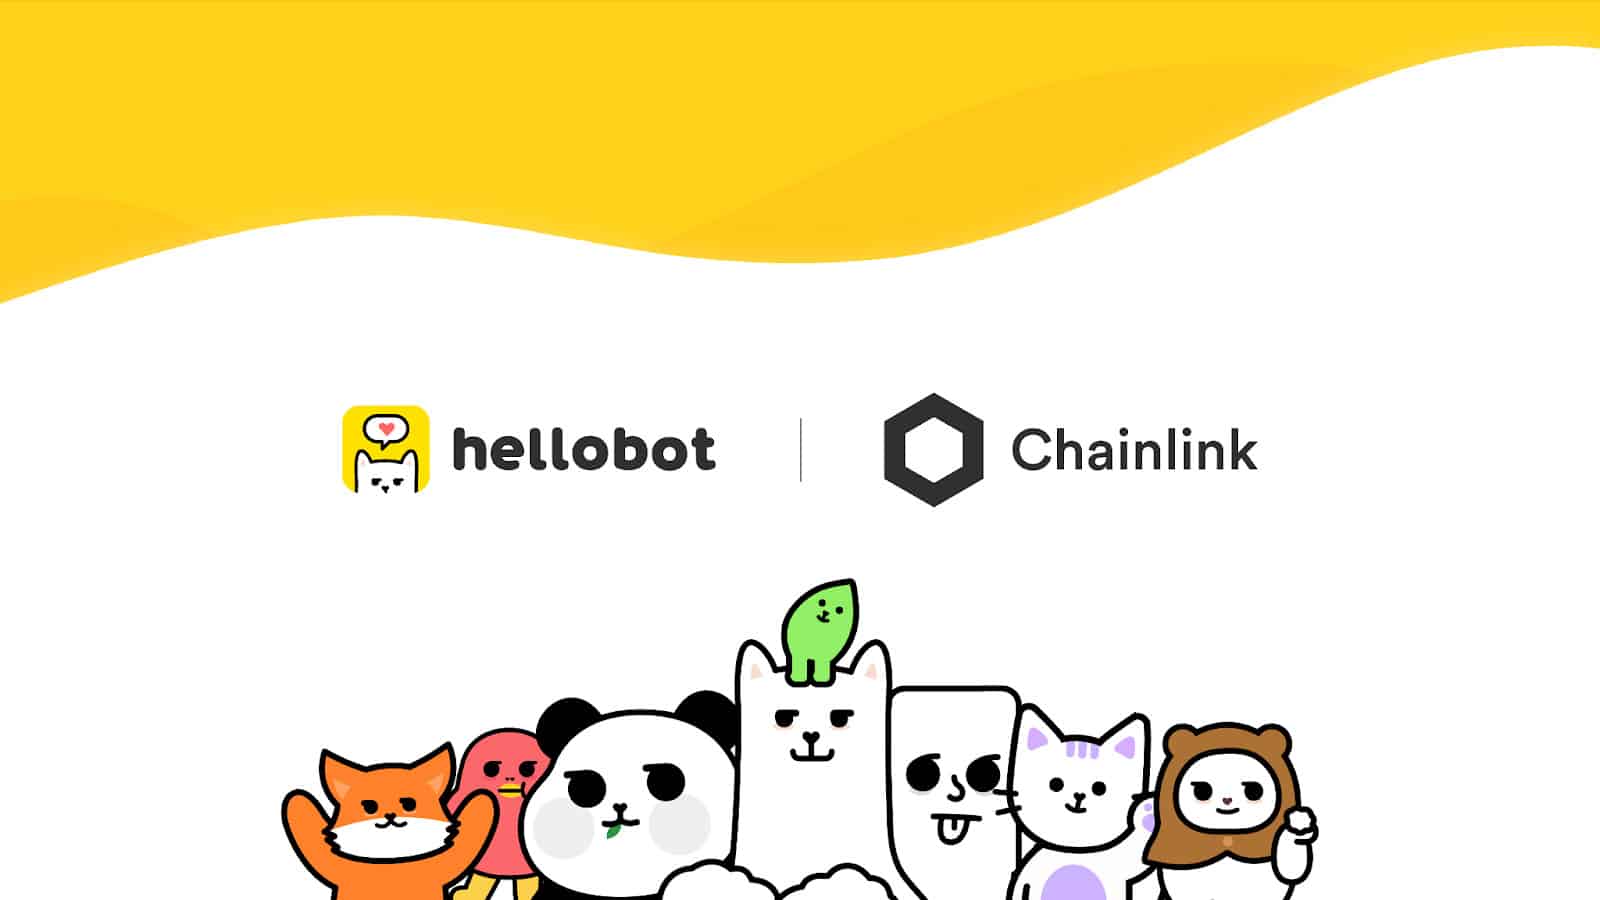 NFT Project Hellobot Integrates Chainlink VRF to Randomize Mystery Box Contents